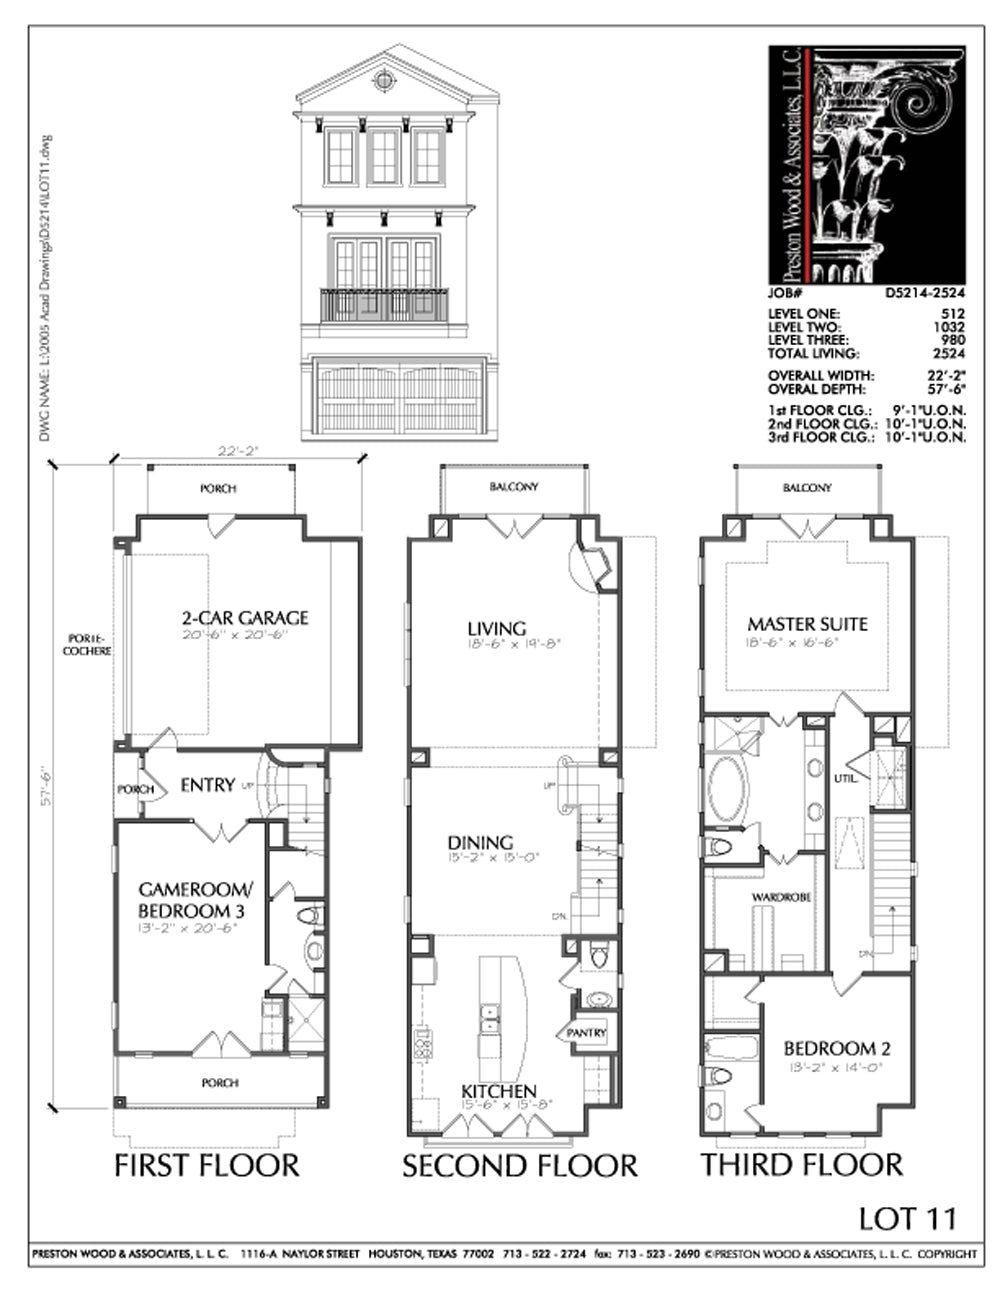 Townhomes Townhouse  Floor  Plans  Urban Row House Plan  